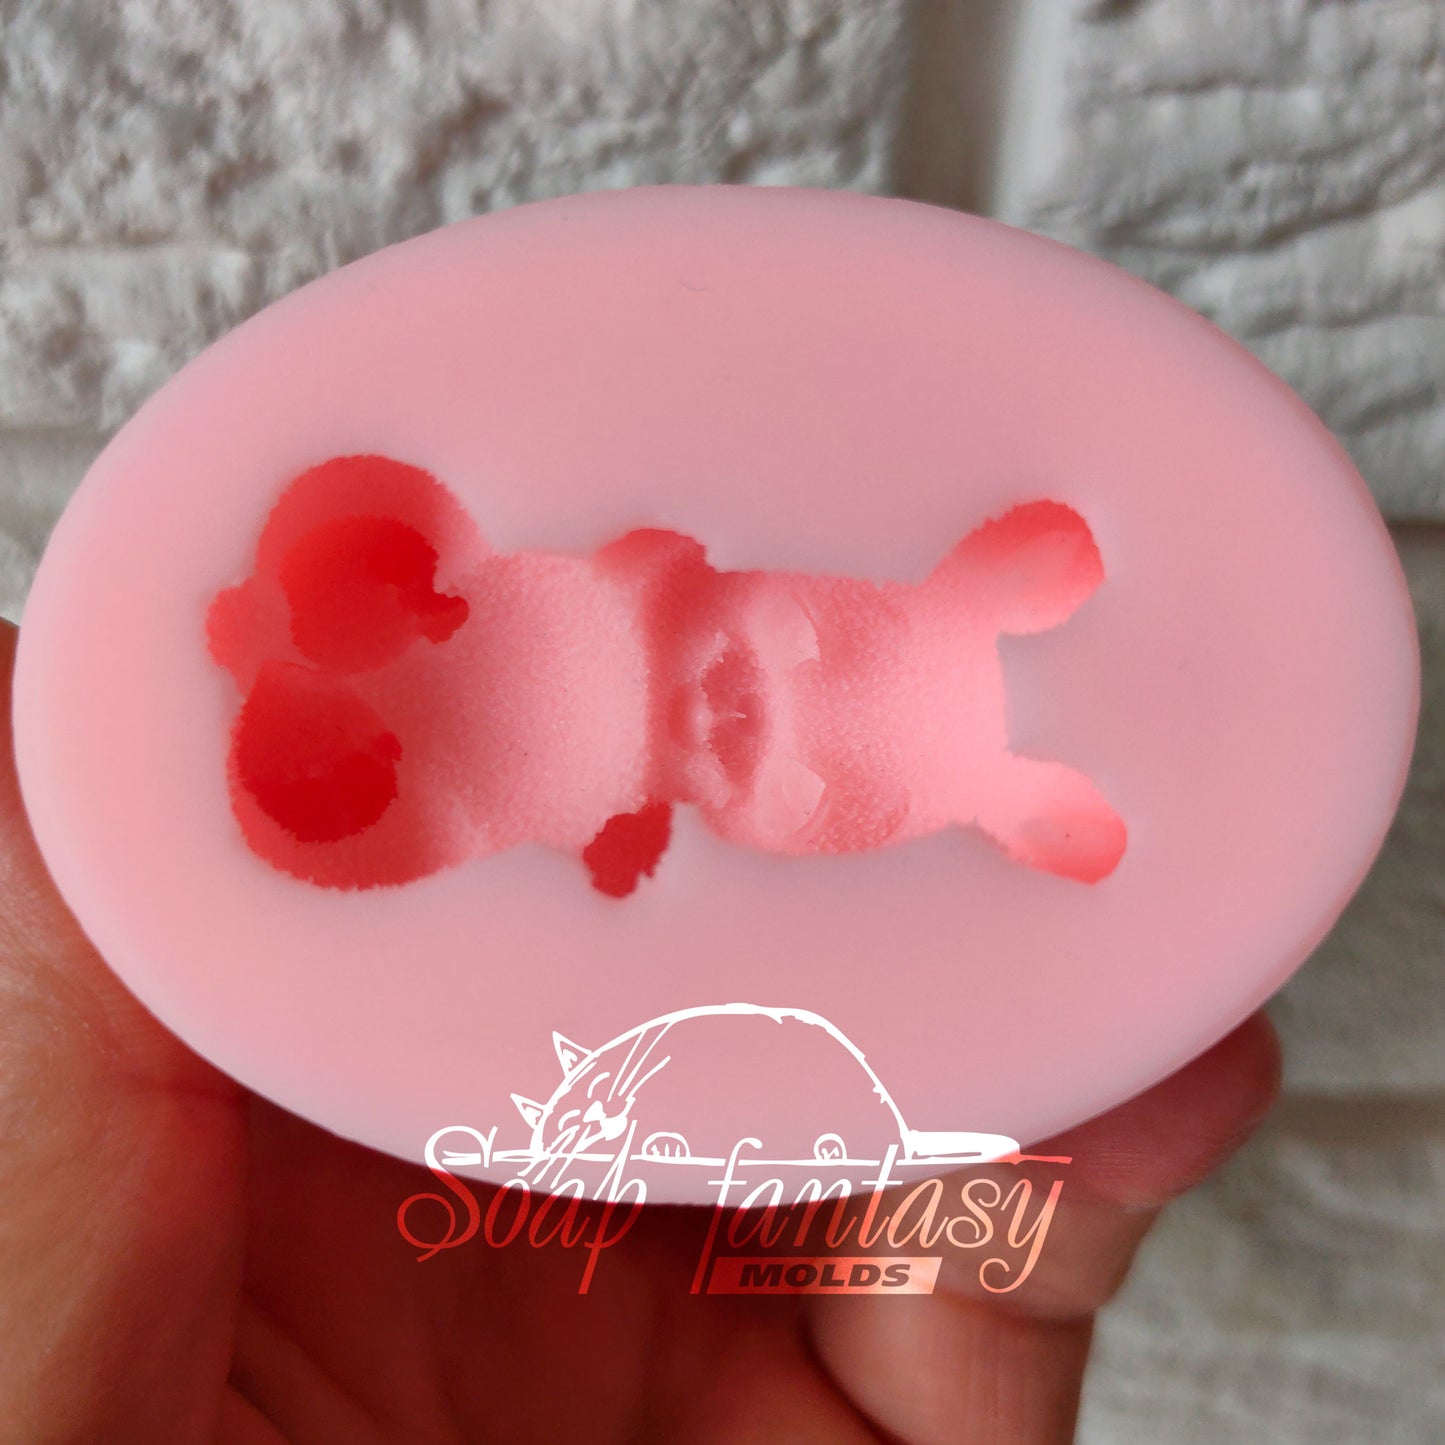 The bunny lies on the back silicone mold for soap making